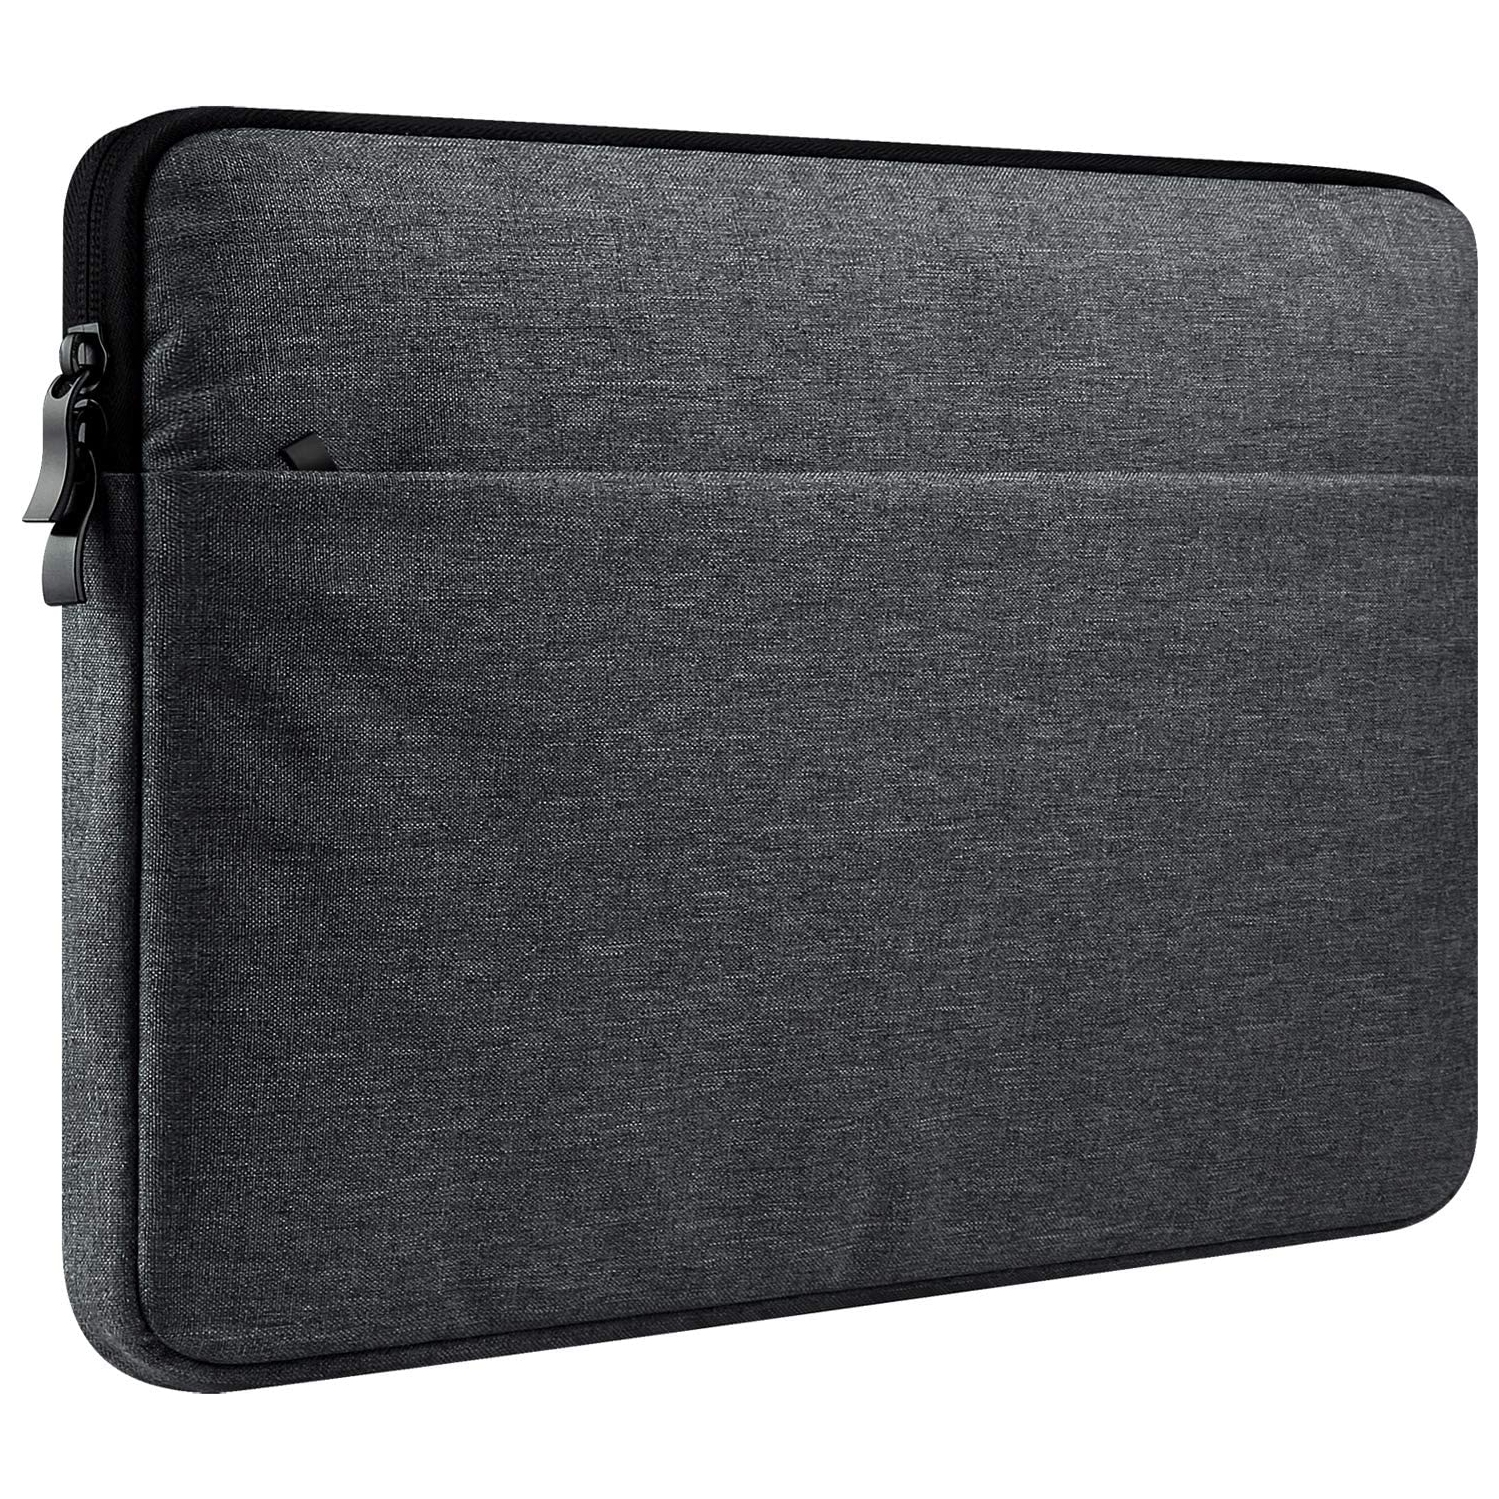 15.6" Laptop Case 15.6 inch Compatible with 16 inch MacBook Pro Sleeve Hp 15.6 Bag Cover Skin Lenovo Computer Acer